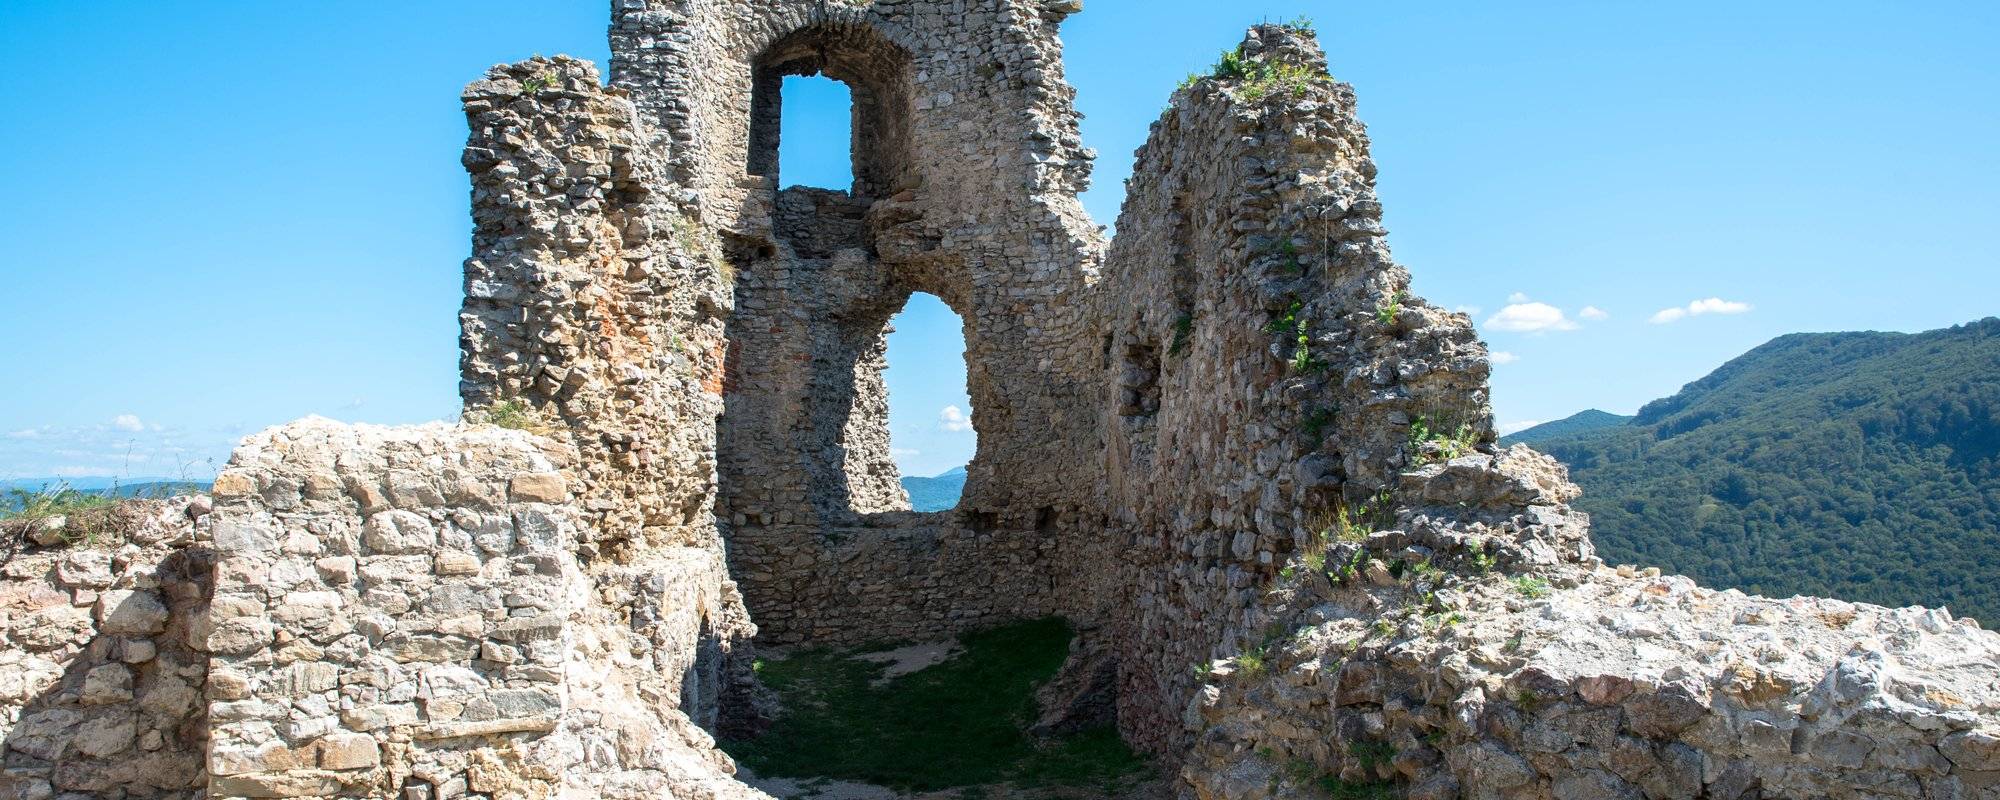 The remains of the Brekov castle